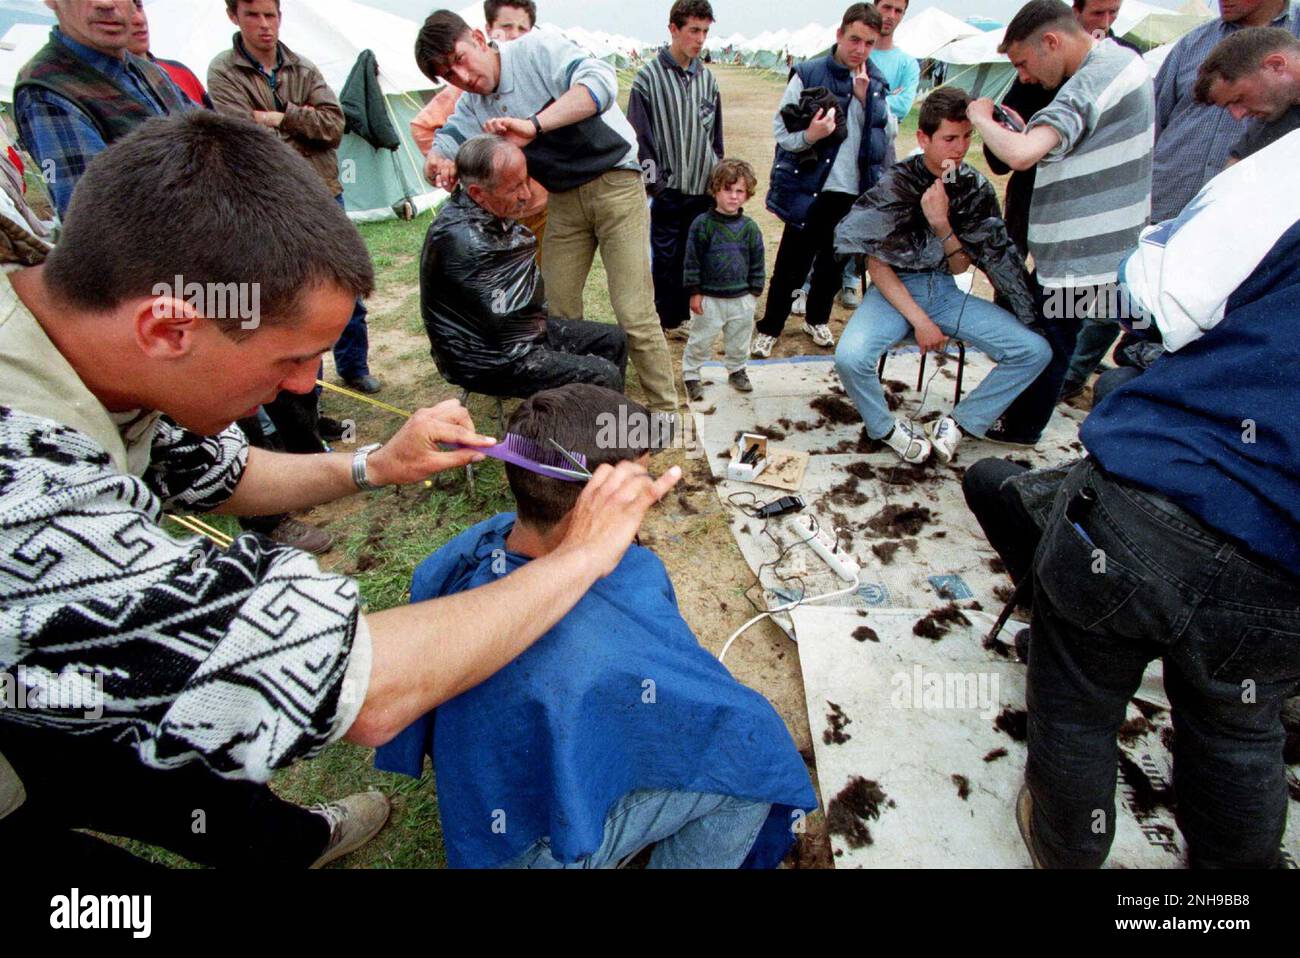 Refugees set up makeshift hair salon having arrived in Northern Macedonia via bus from the boarder crossing. Brazda refugee camp in Macedonia April 1999. The camp was run by NATO but  turned over  to UNHCR. Macedonia. Picture garyrobertsphotography.com Stock Photo